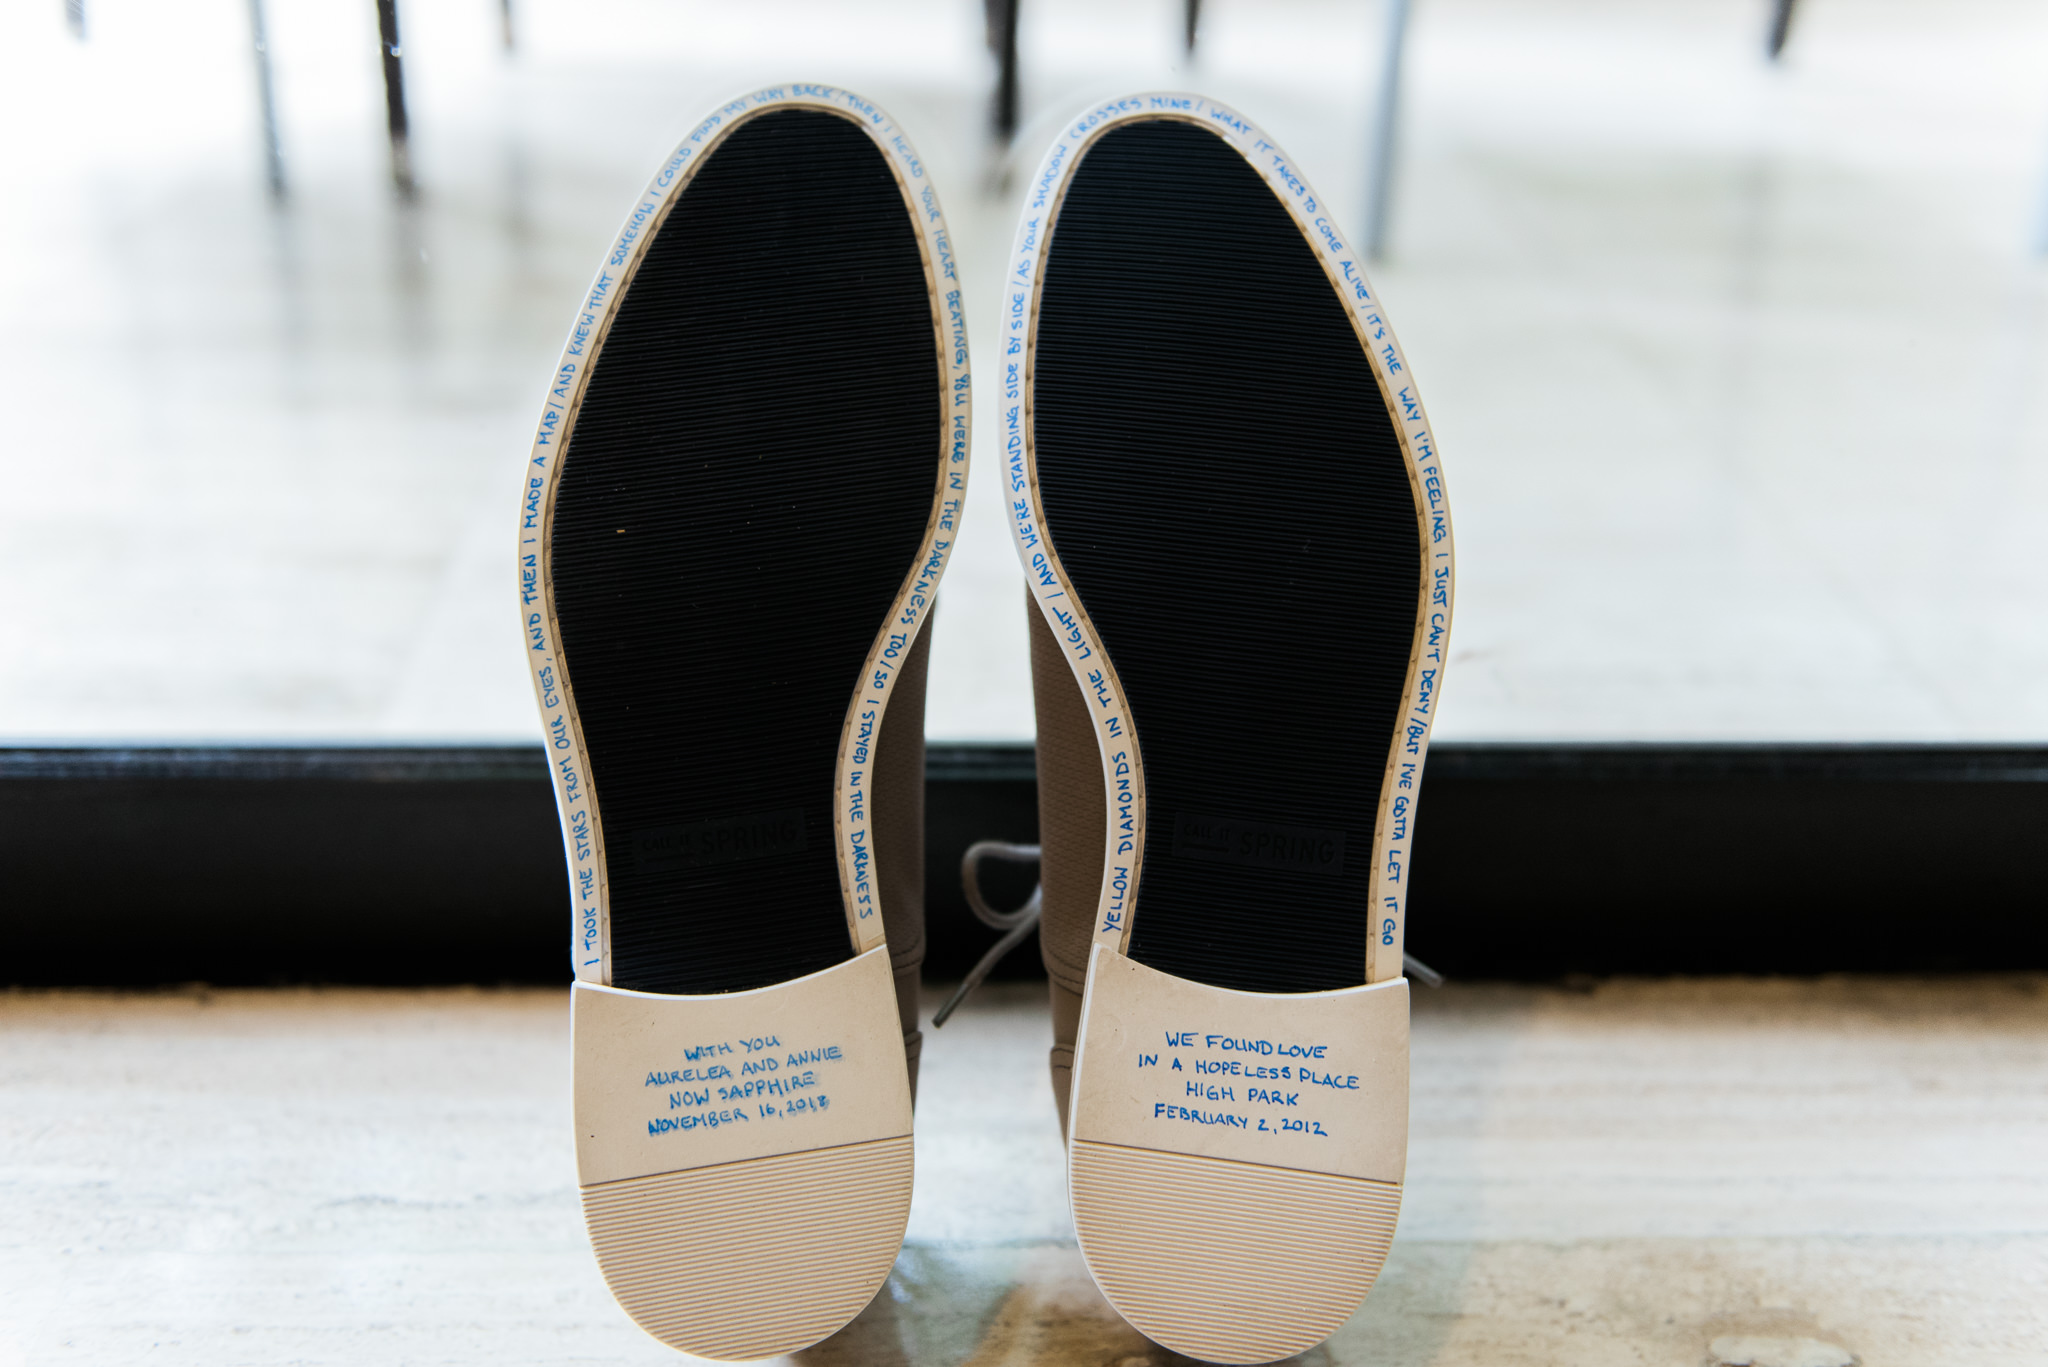 brides wedding shoes with blue writing on the bottom with personalized messages ahead of their destination wedding at Now Sapphire Resort in Mexico